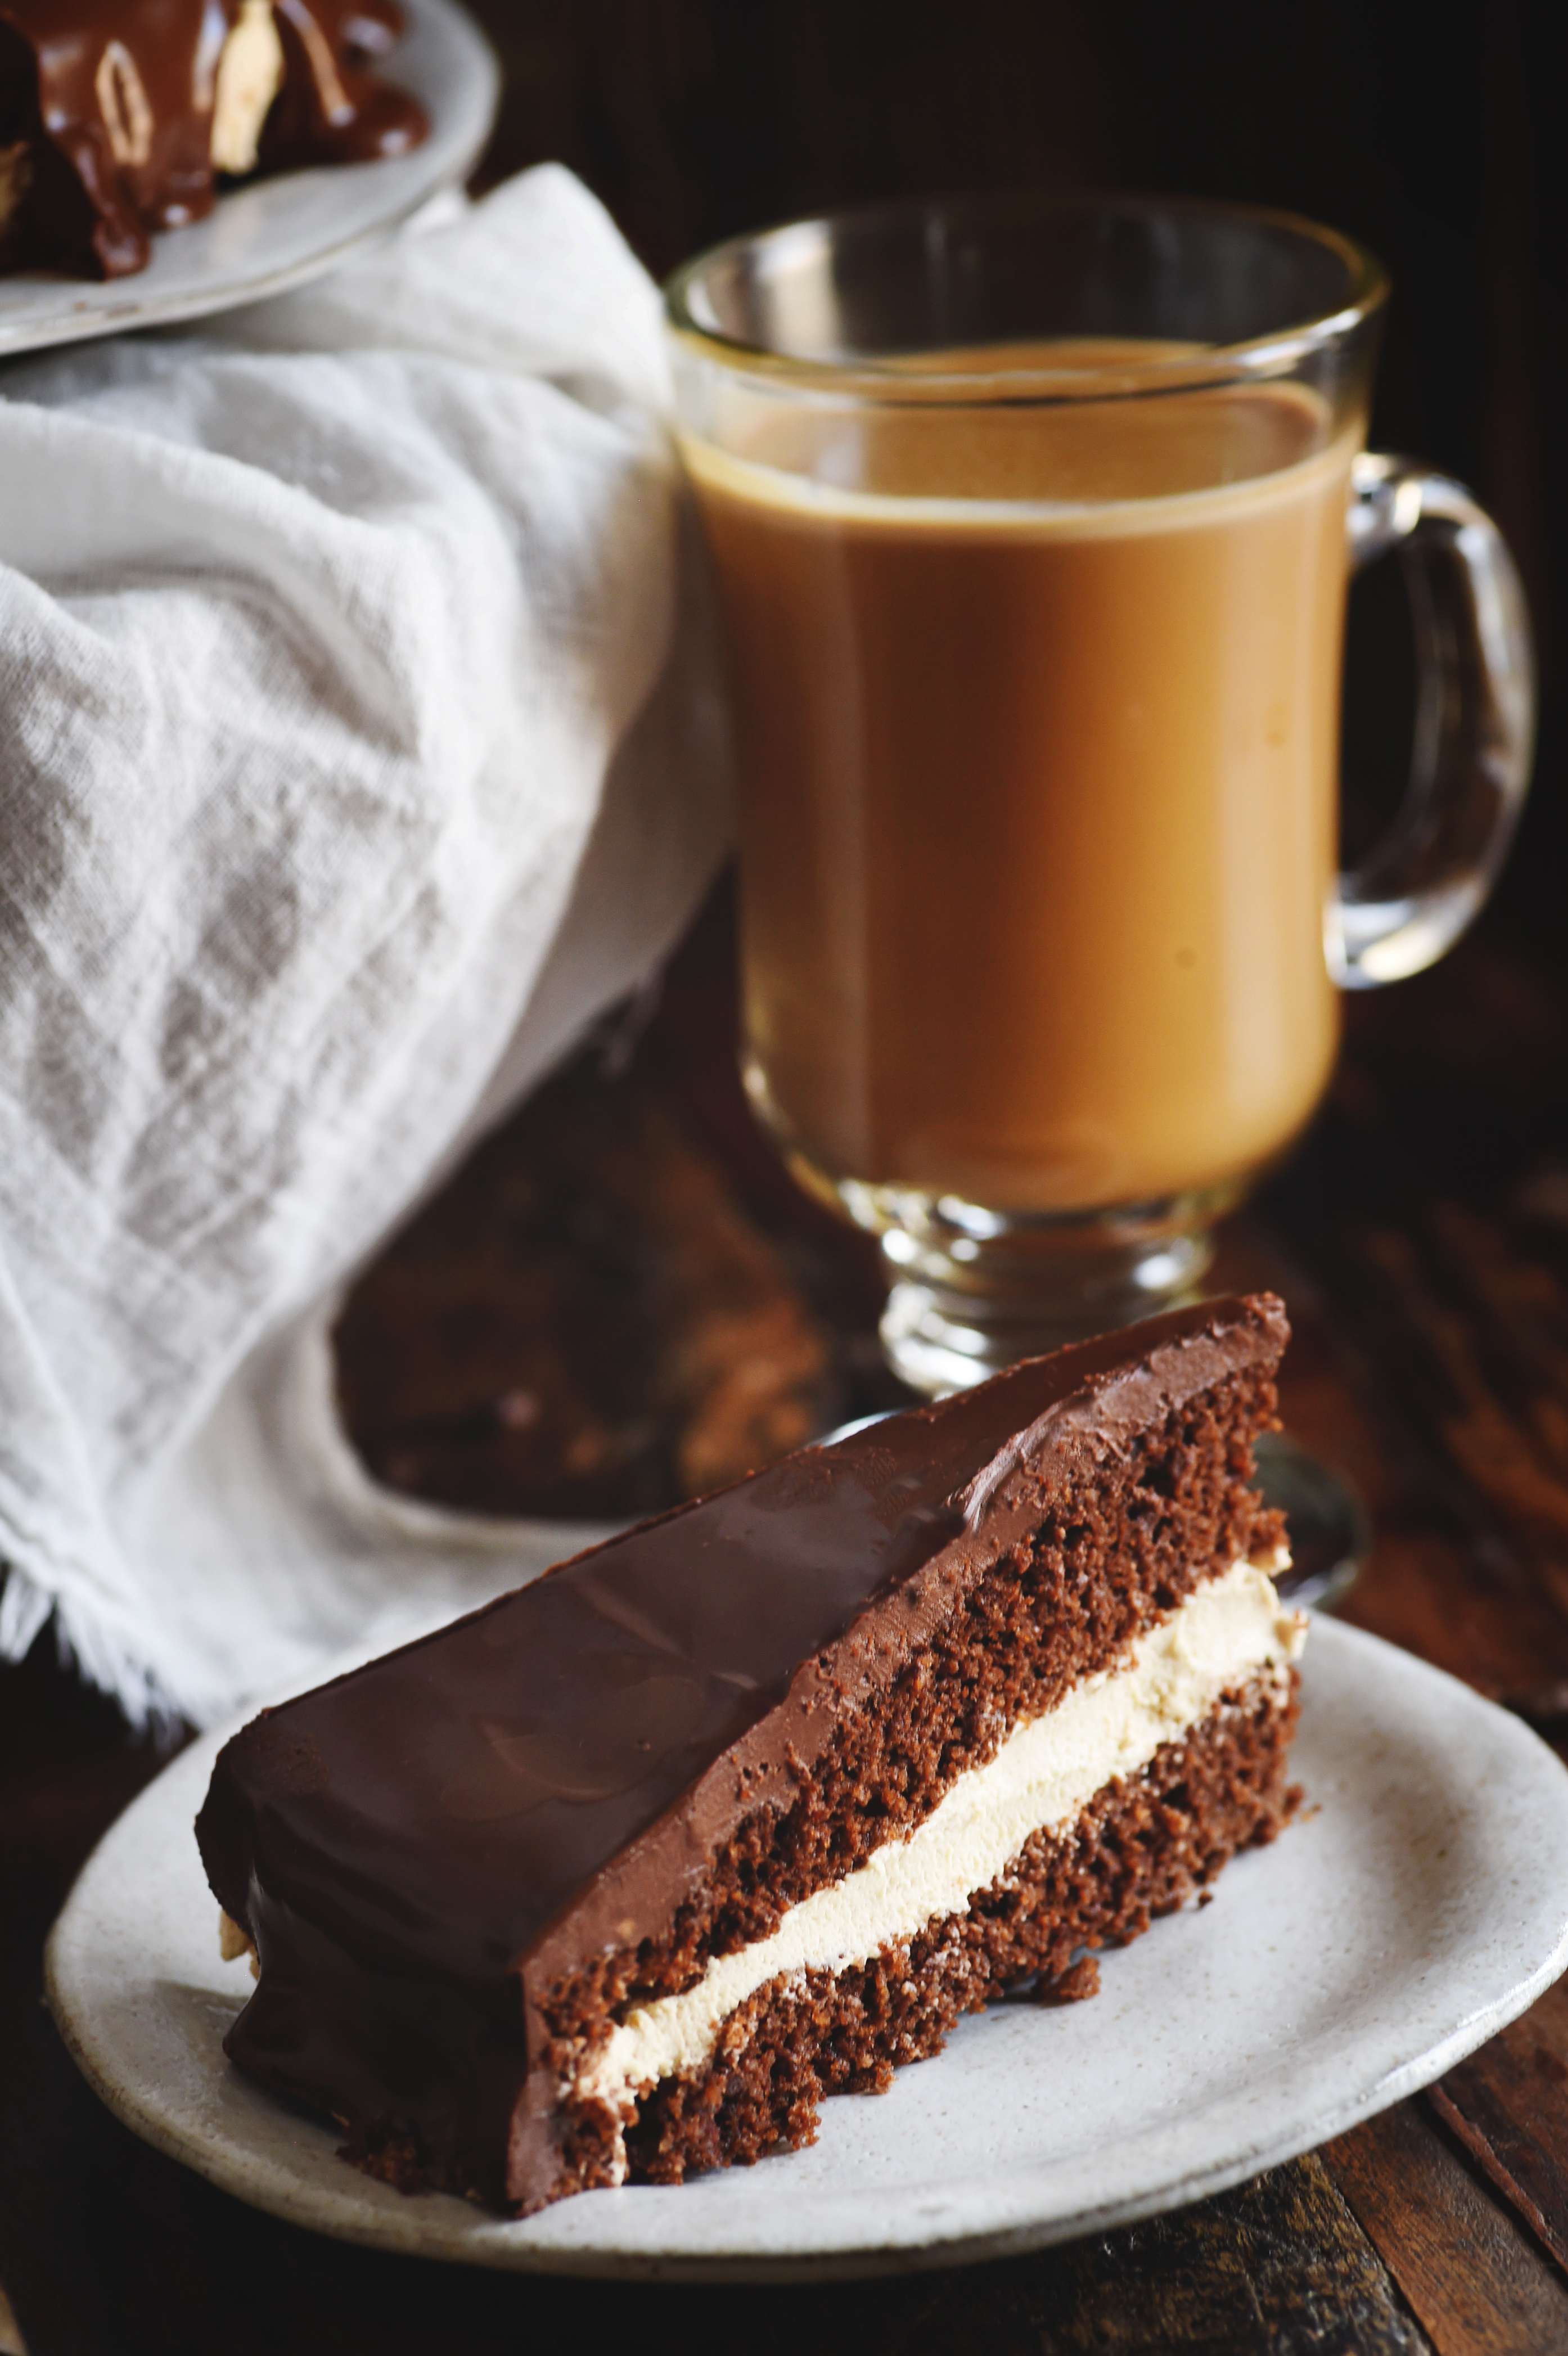 Low-Carb Chocolate Latte Dream Cake served on plate with coffee.